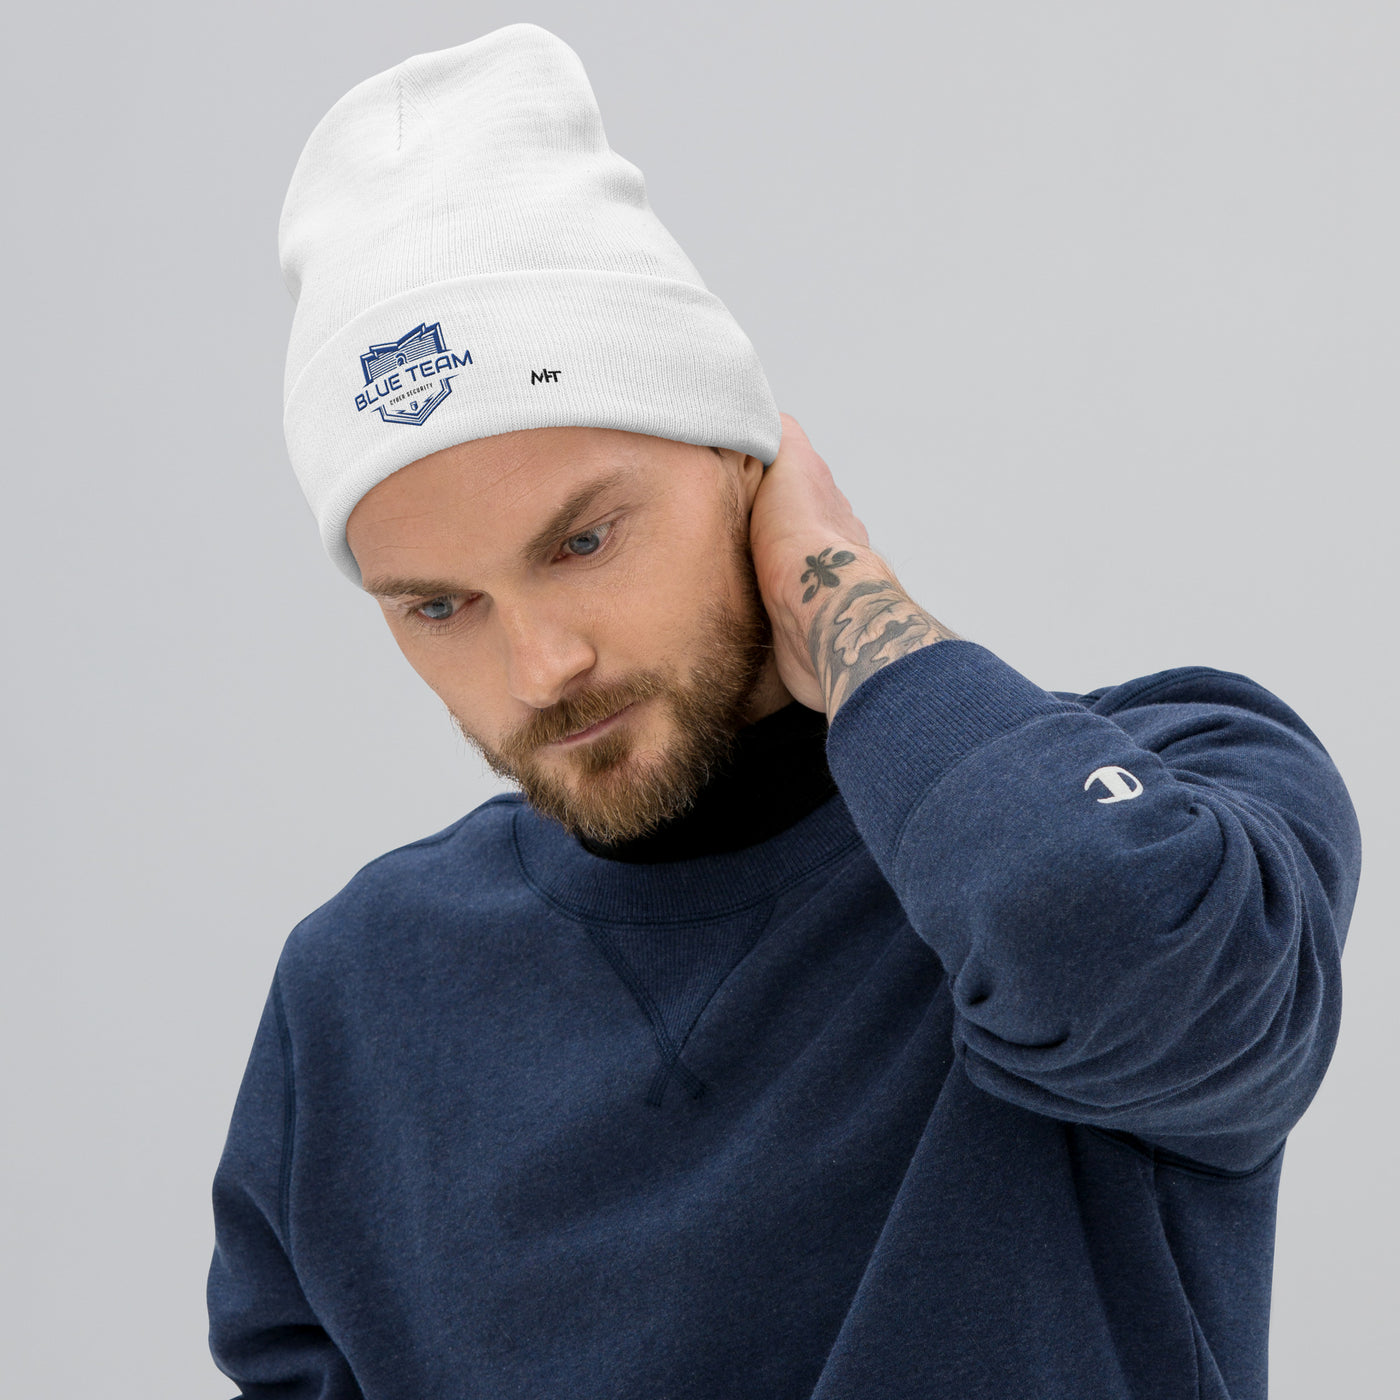 Cyber Security Blue Team V17 - Embroidered Beanie